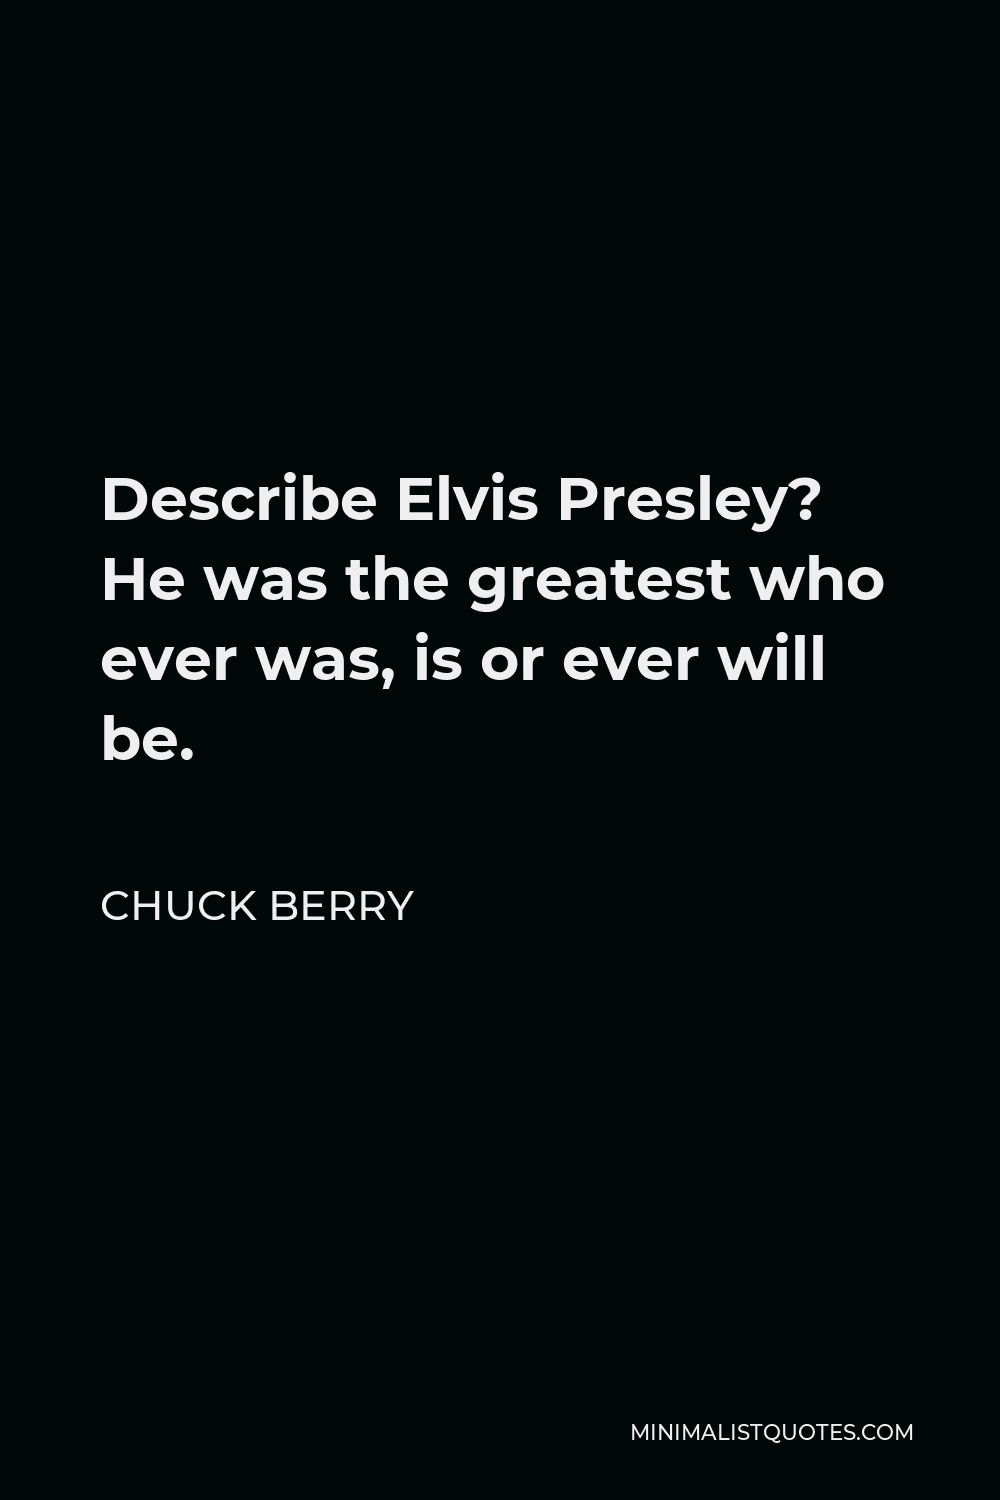 Chuck Berry Quote - Describe Elvis Presley? He was the greatest who ever was, is or ever will be.